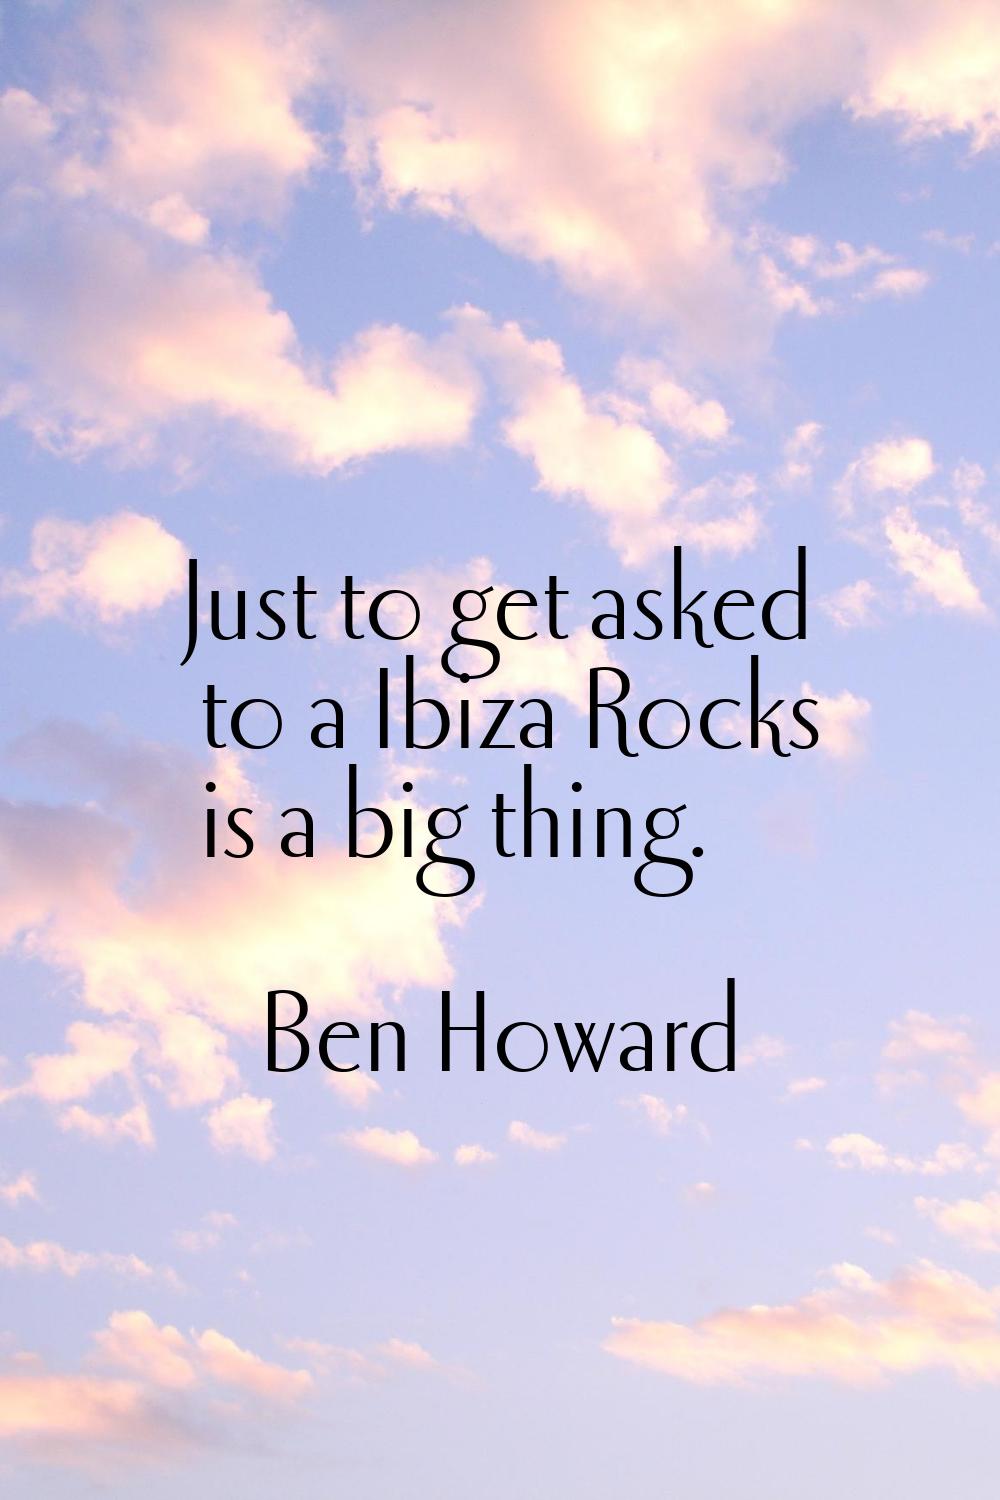 Just to get asked to a Ibiza Rocks is a big thing.